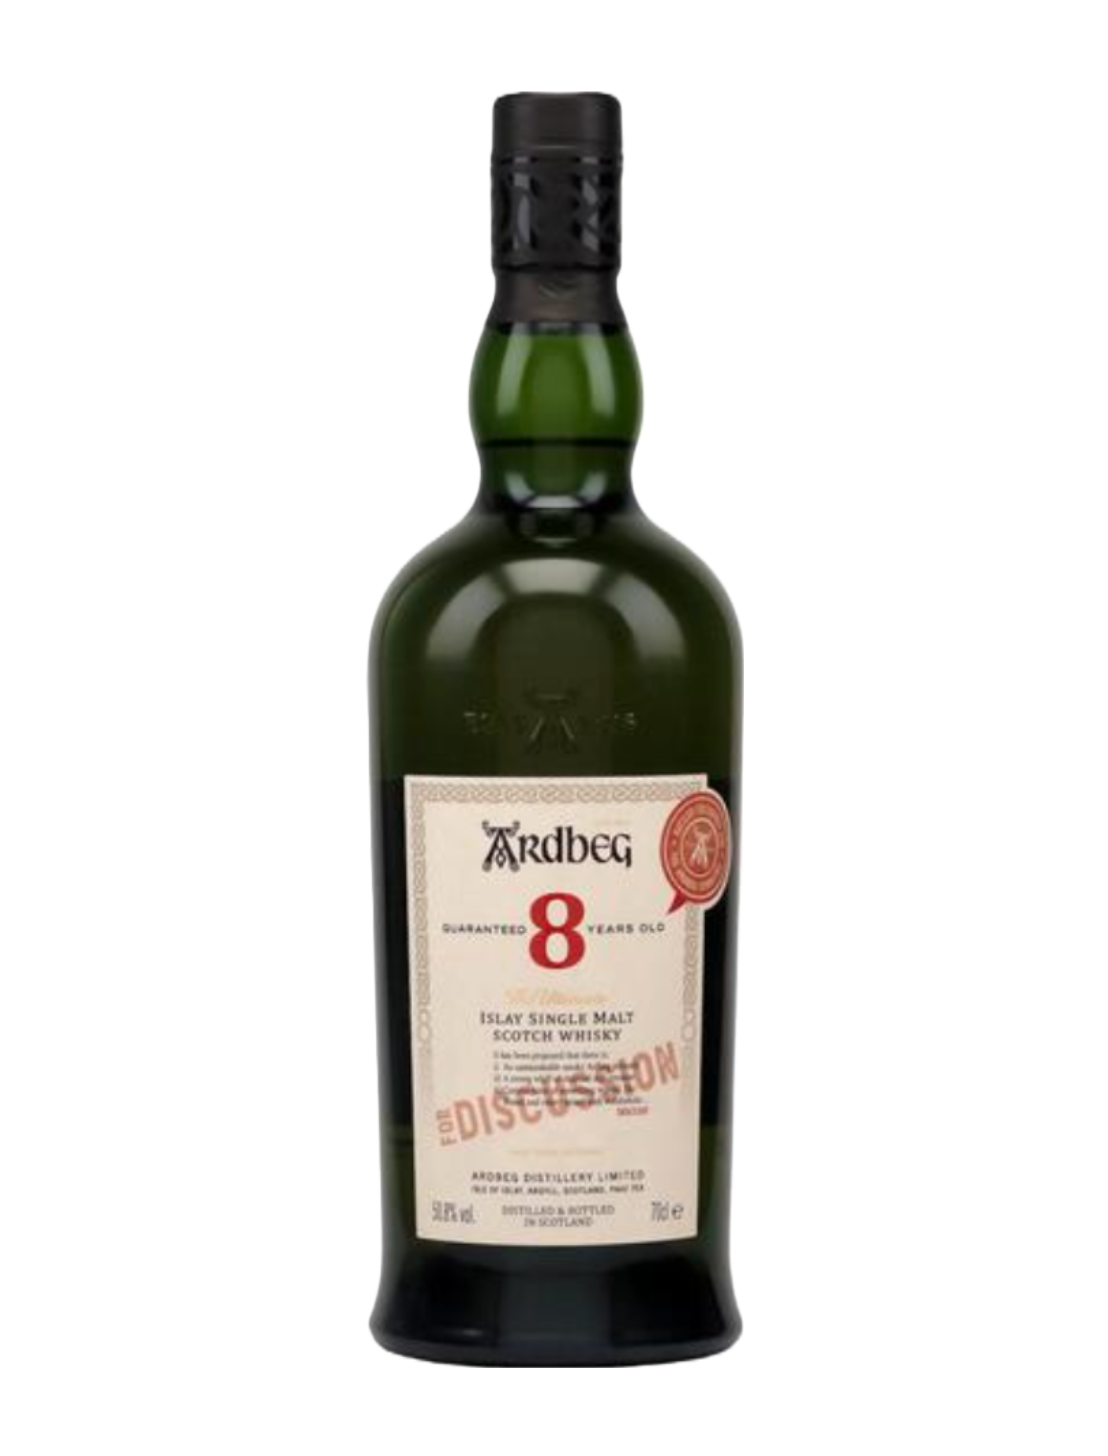 An elegant bottle of Ardbeg 8 Years Old Single Malt Scotch in front of a plain white background